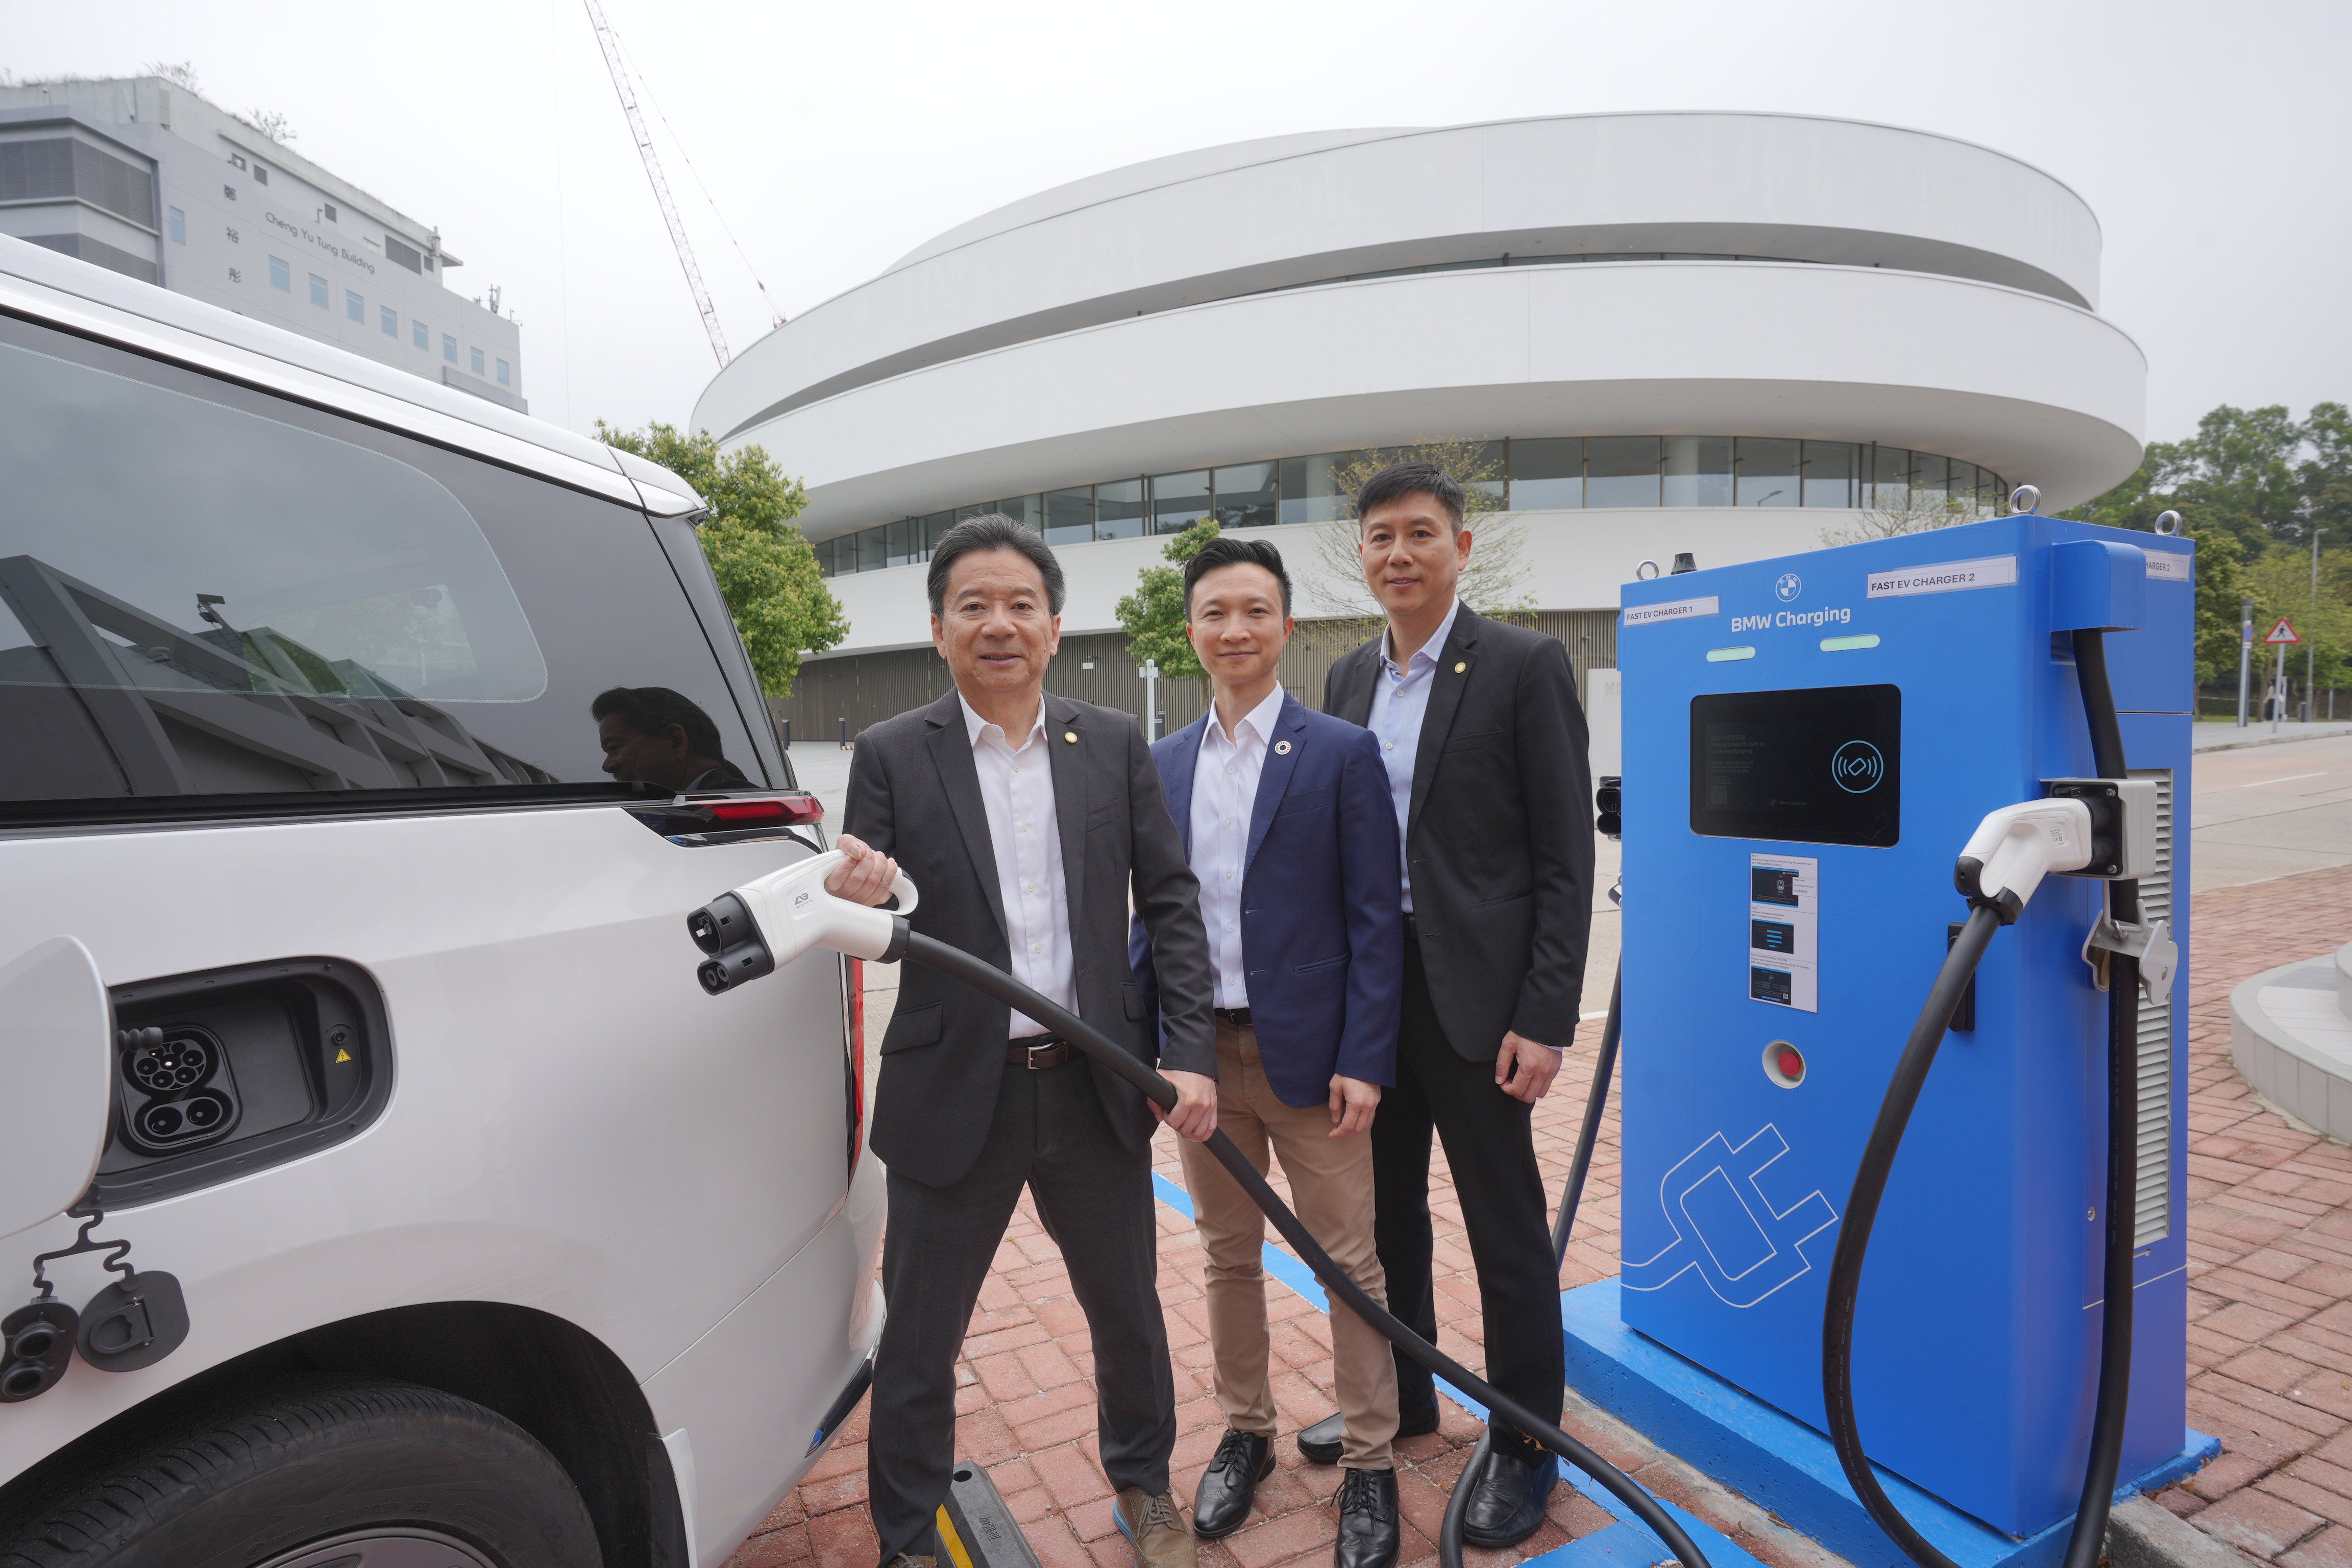 HKUST Vice-President for Administration and Business Prof. PONG Ting-Chuen (left), Director of Campus Management Office Mr. Alex CHEUNG (right) and Acting Director of Sustainability/Net-Zero Office Mr. Marcus LEUNG-SHEA try out the newly launched fast EV charger this week.